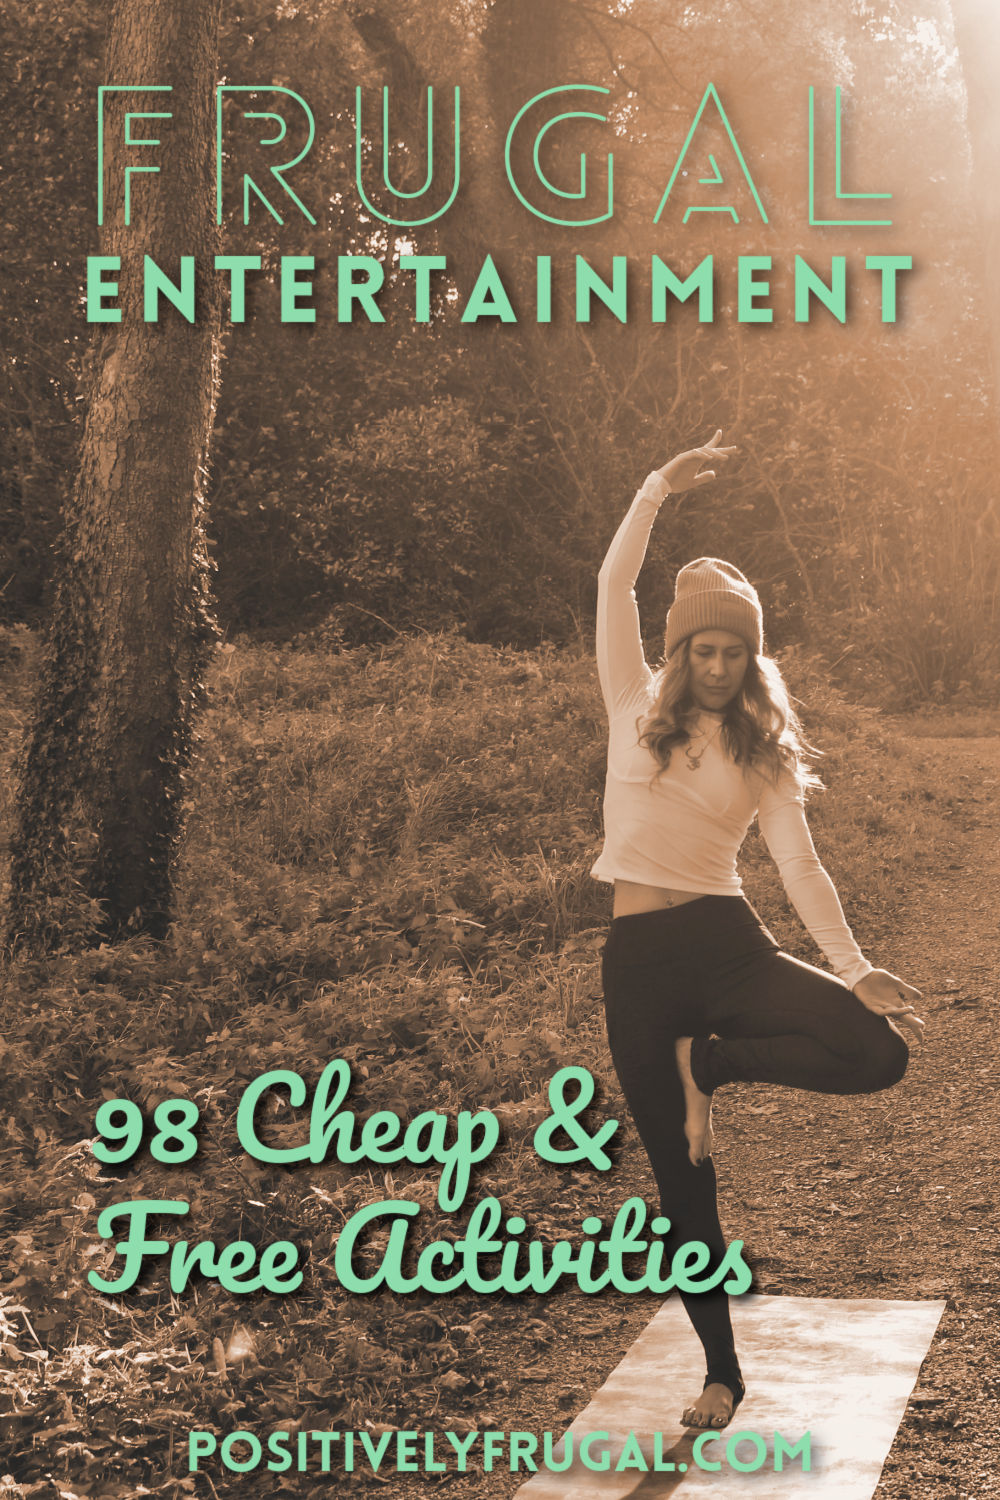 Frugal Entertainment Fun Cheap and Free Activities by PositivelyFrugal.com